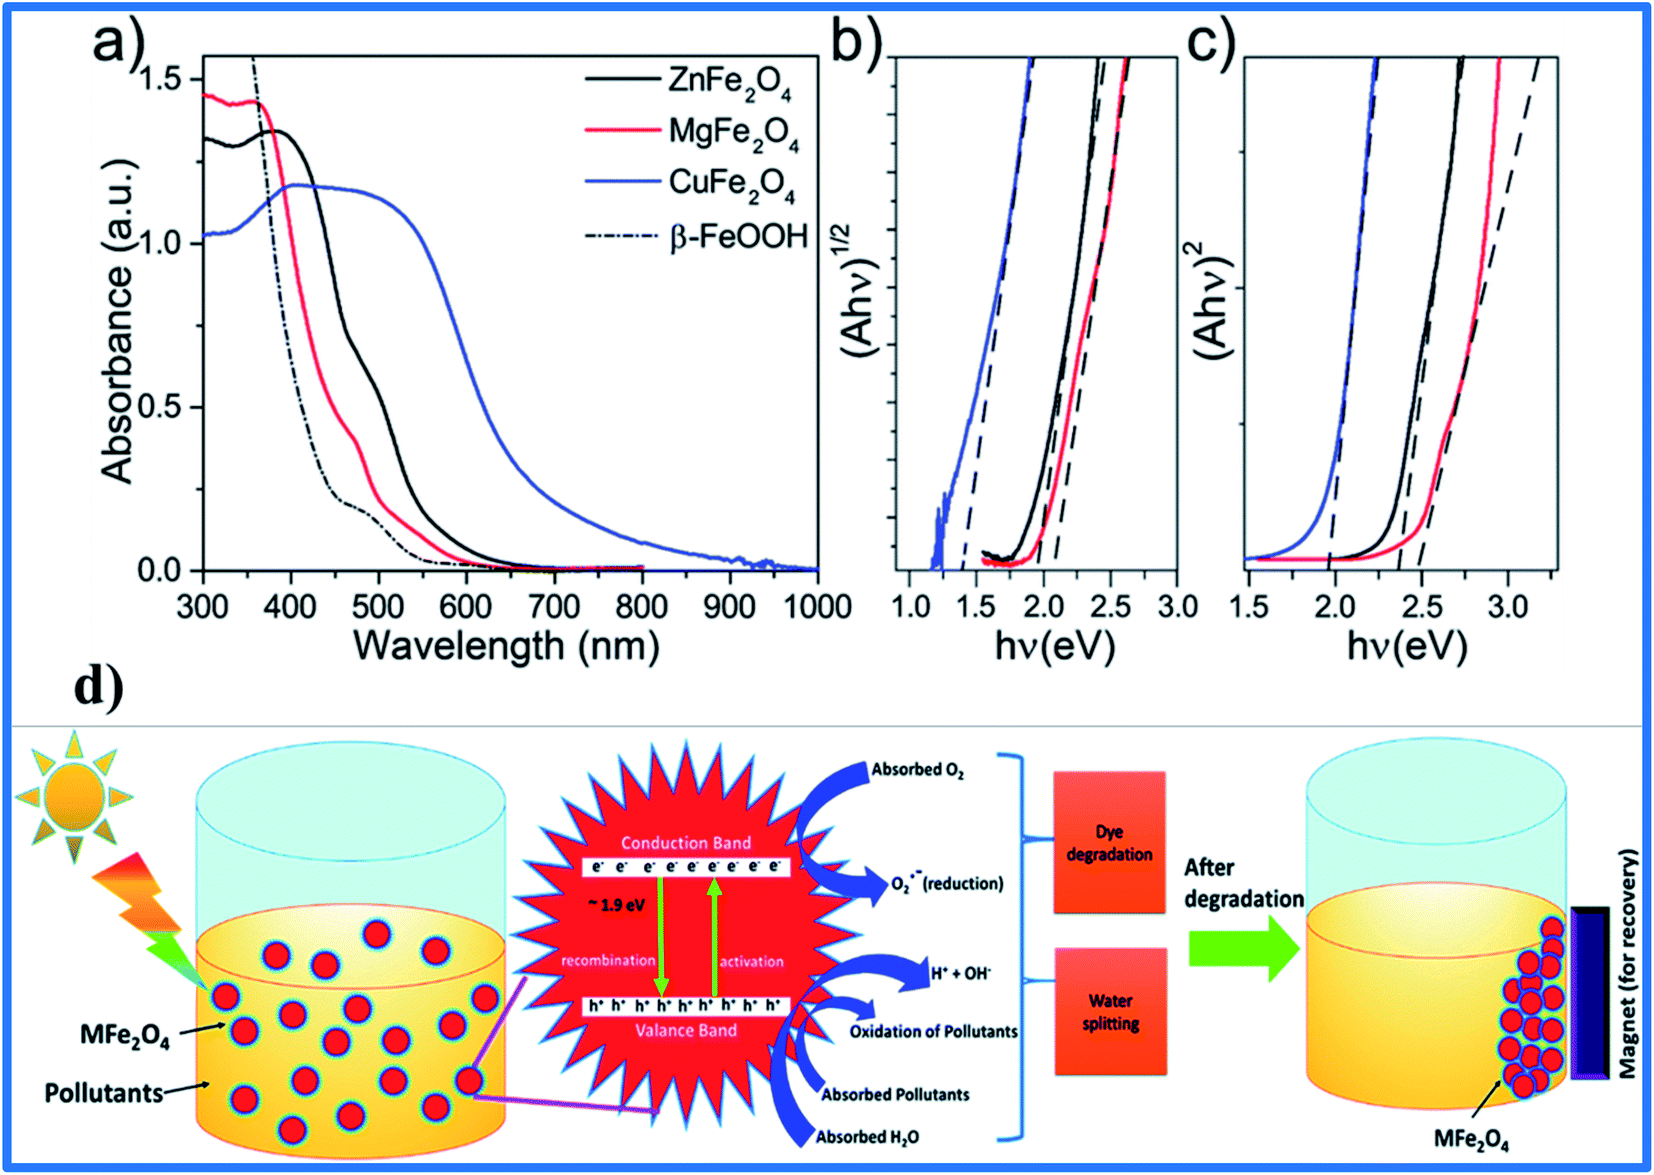 Spinel Ferrite Afe 2 O 4 Based Heterostructured Designs For Lithium Ion Battery Environmental Monitoring And Biomedical Applications Rsc Advances Rsc Publishing Doi 10 1039 D0rak